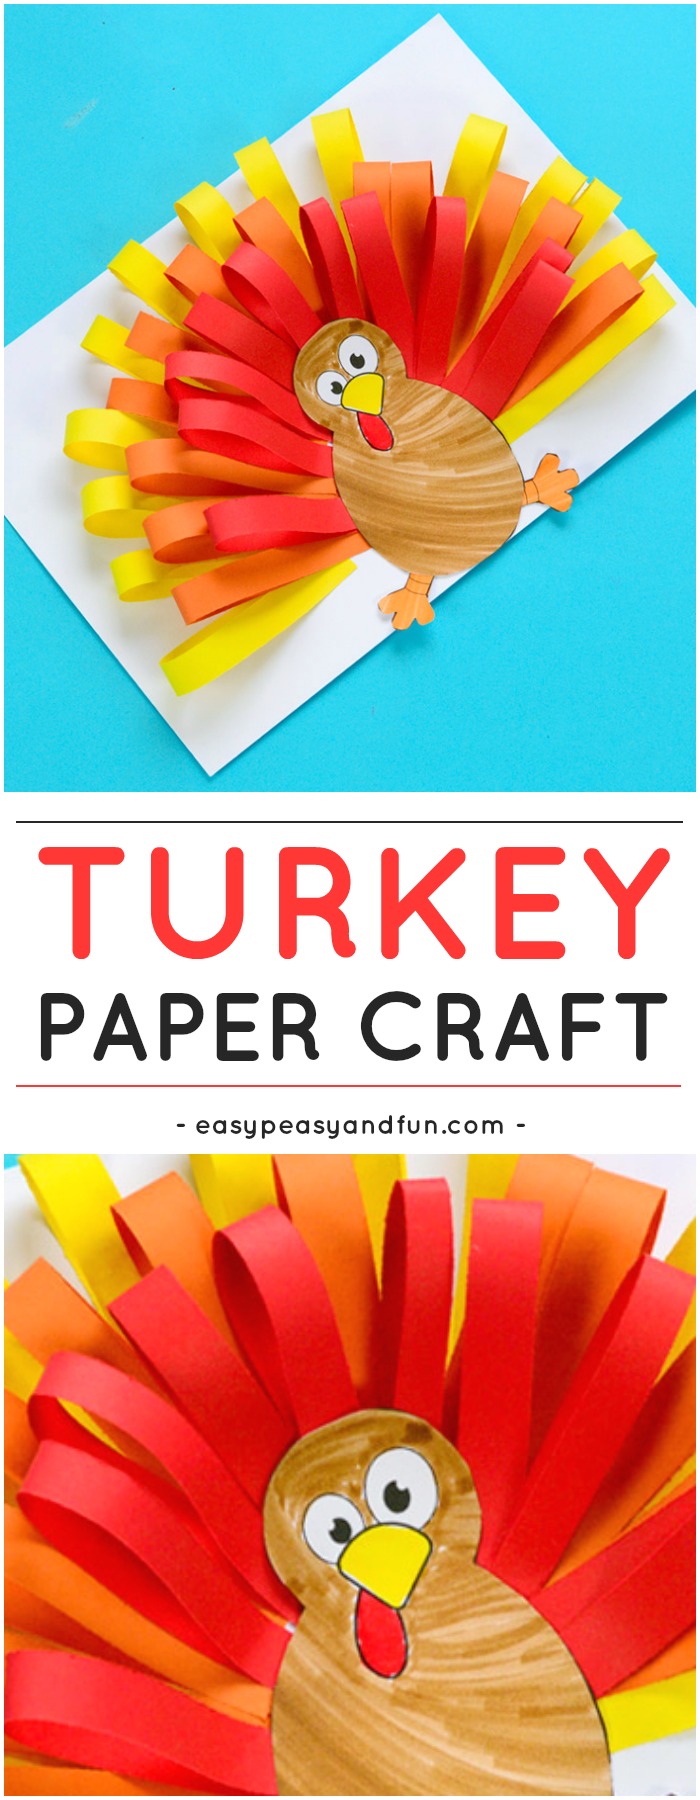 Cute paper turkey crafts for kids. Fun Thanksgiving and autumn activities for kids.